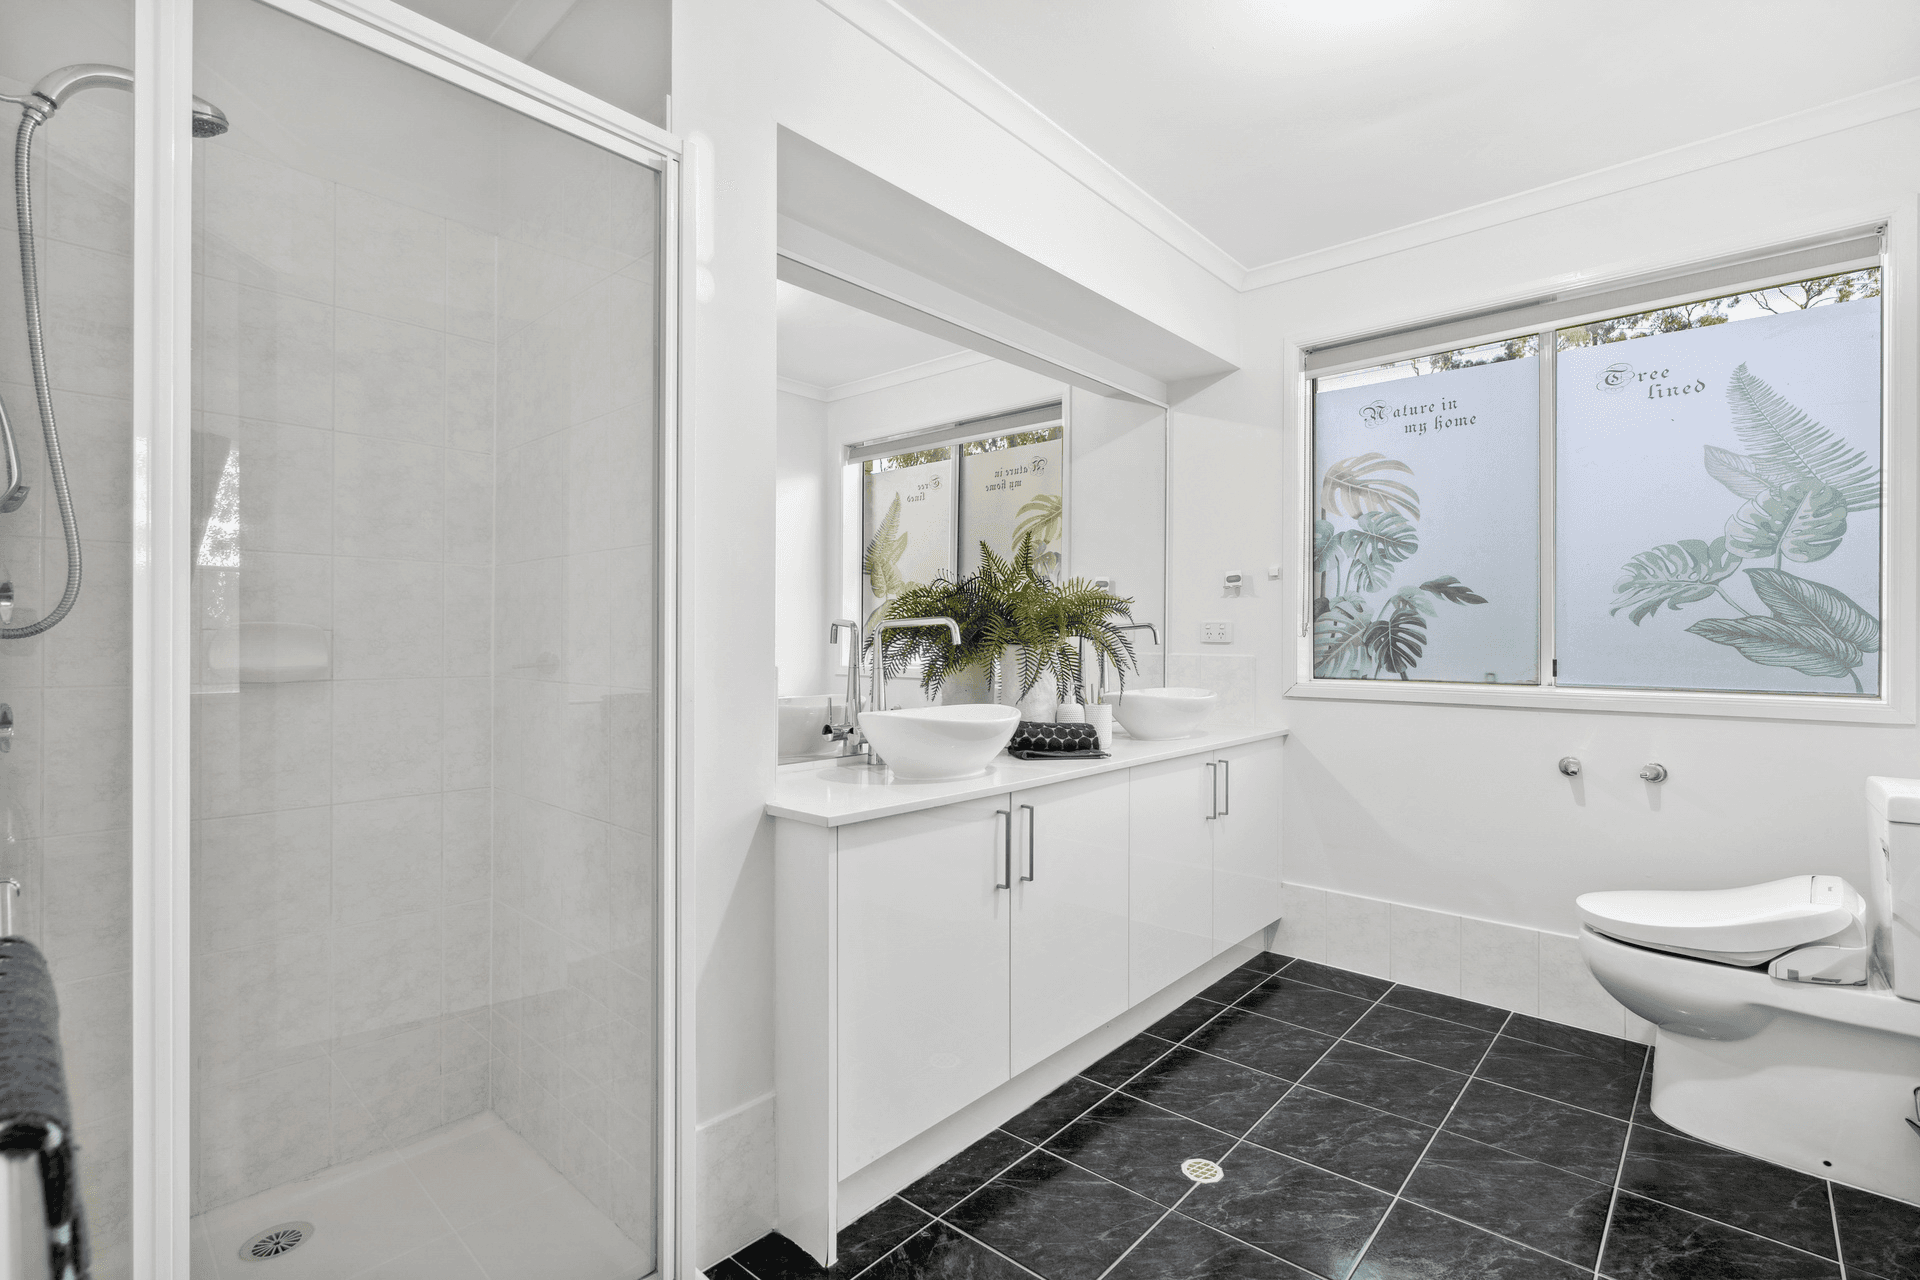 22A Gothic Avenue, Stonyfell, SA 5066